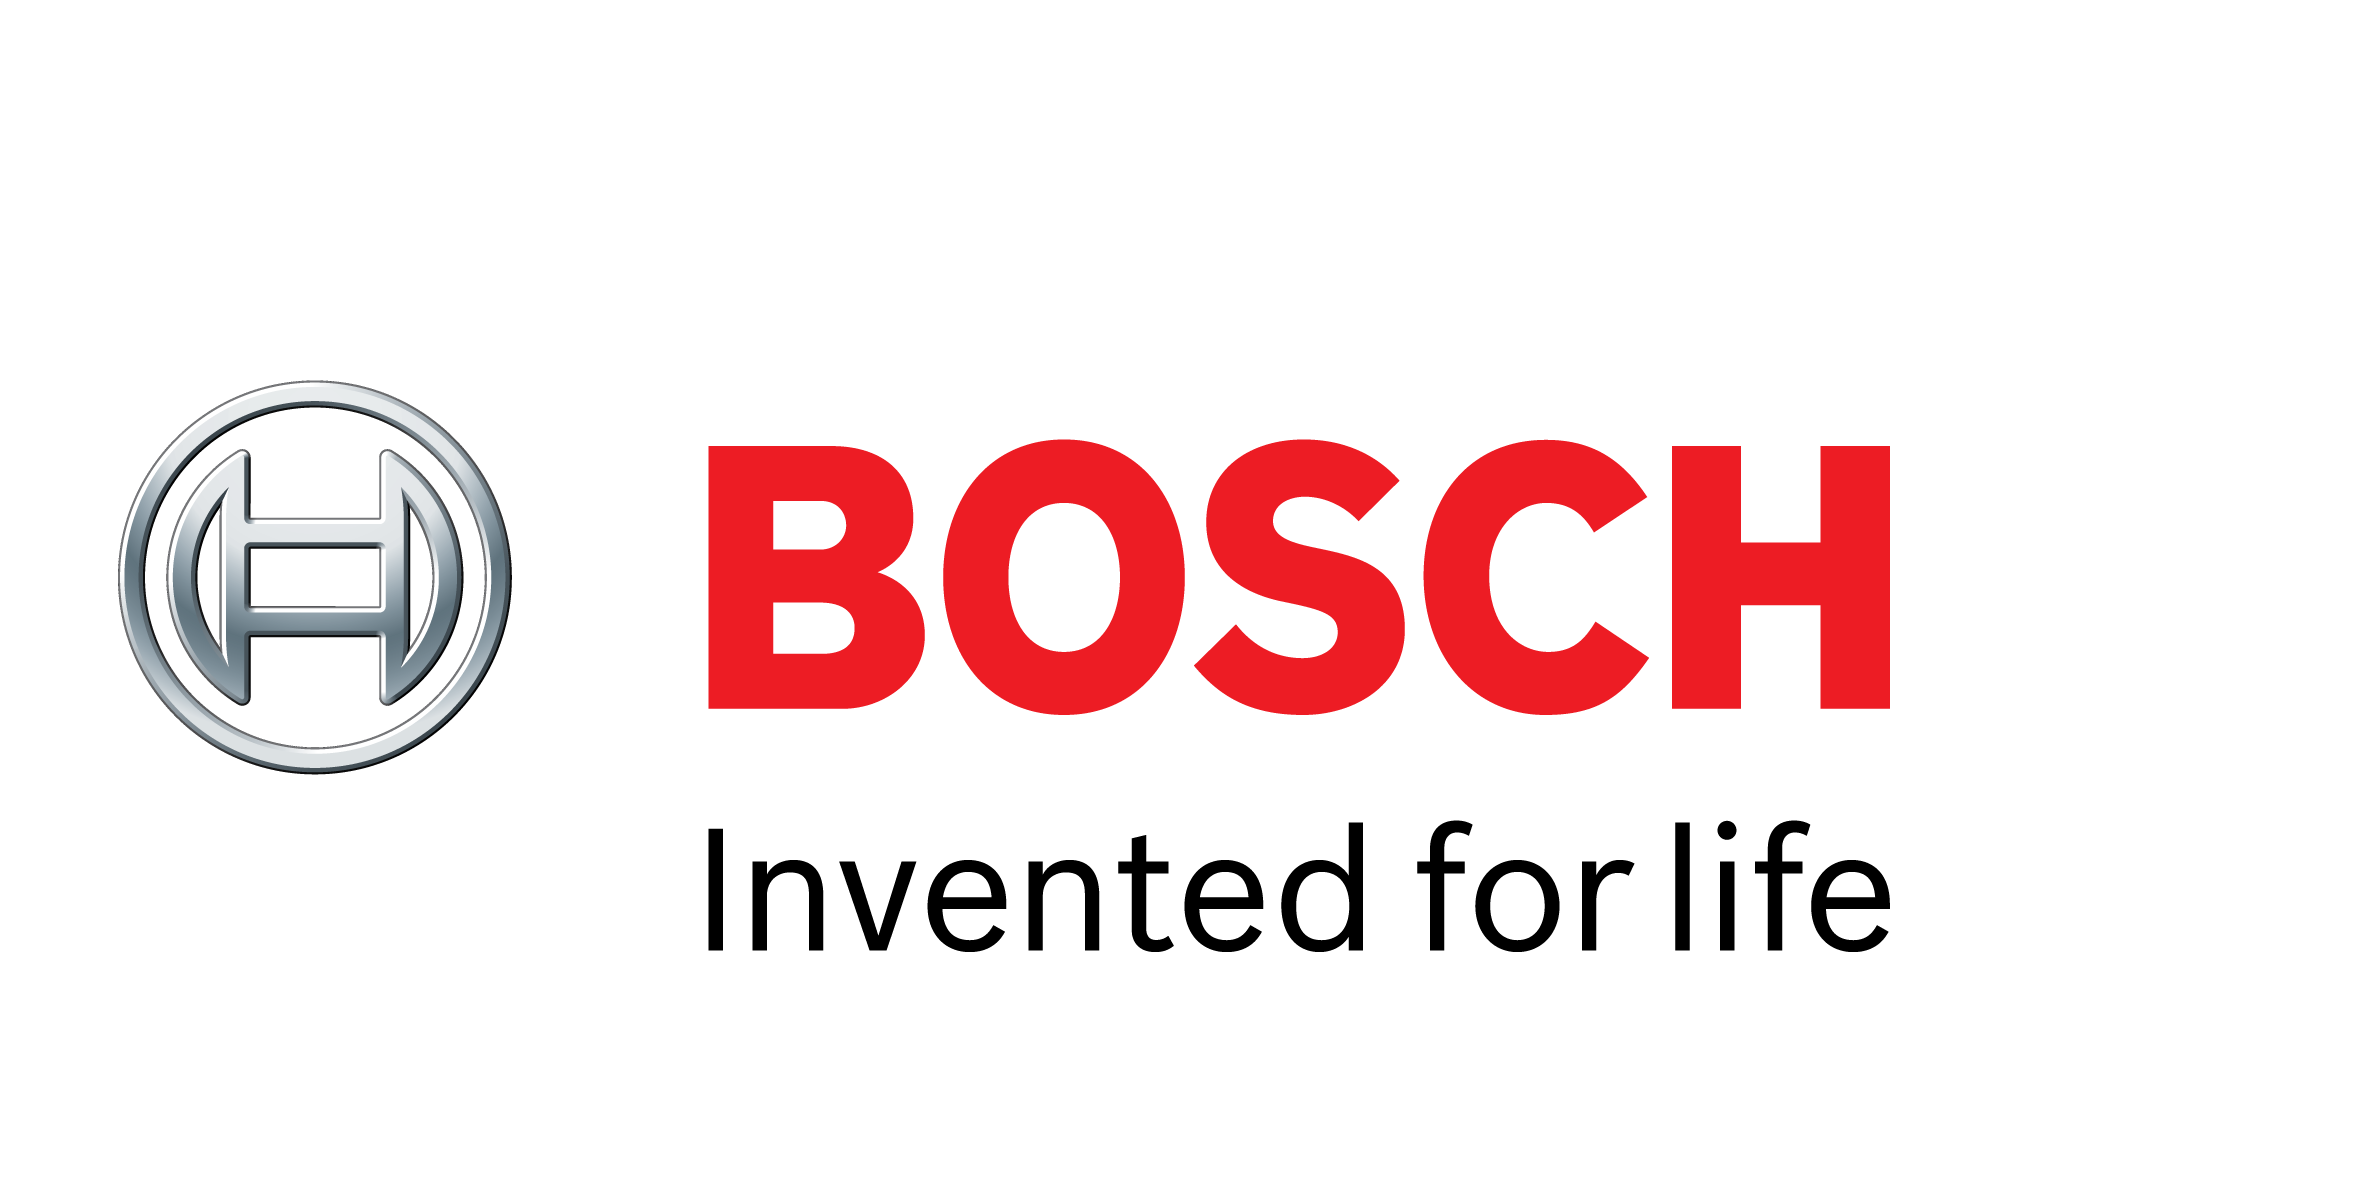 Bosch. Invented for life.